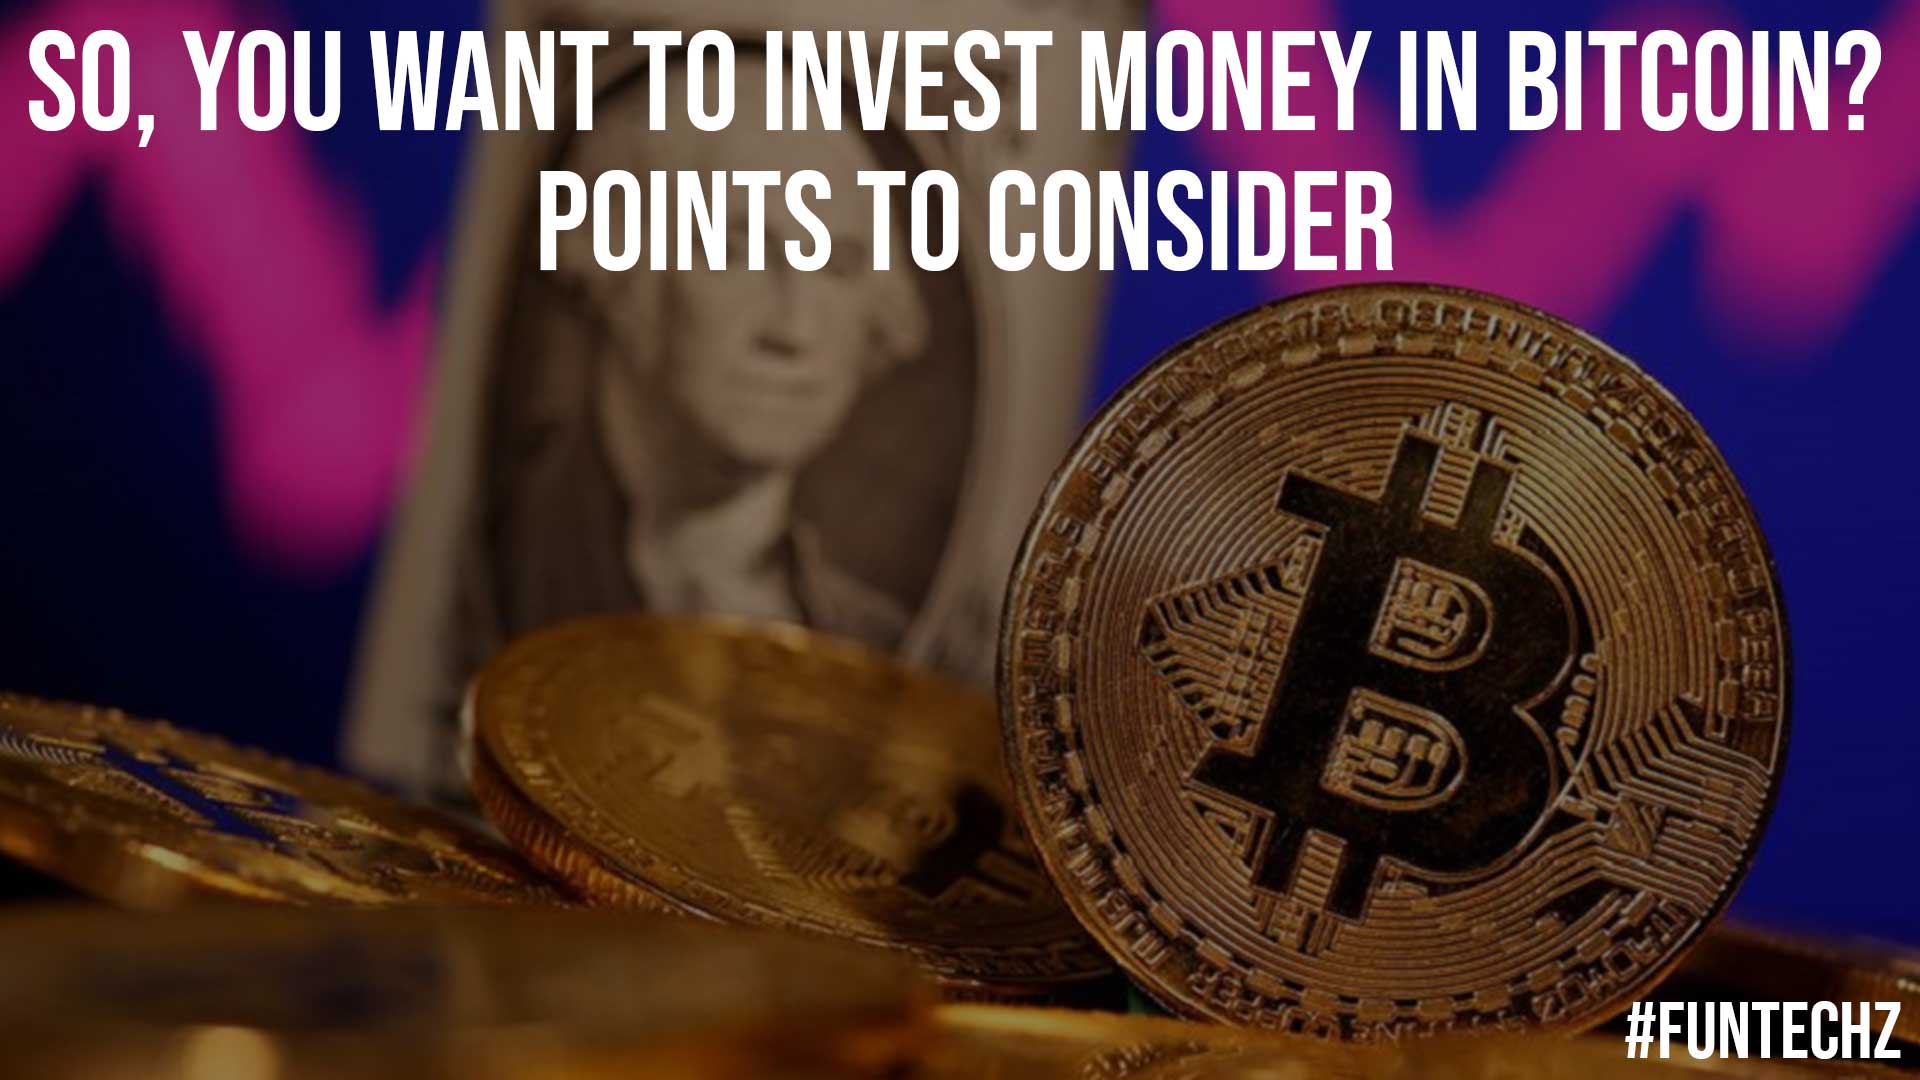 So You Want to Invest Money in Bitcoin Points to Consider